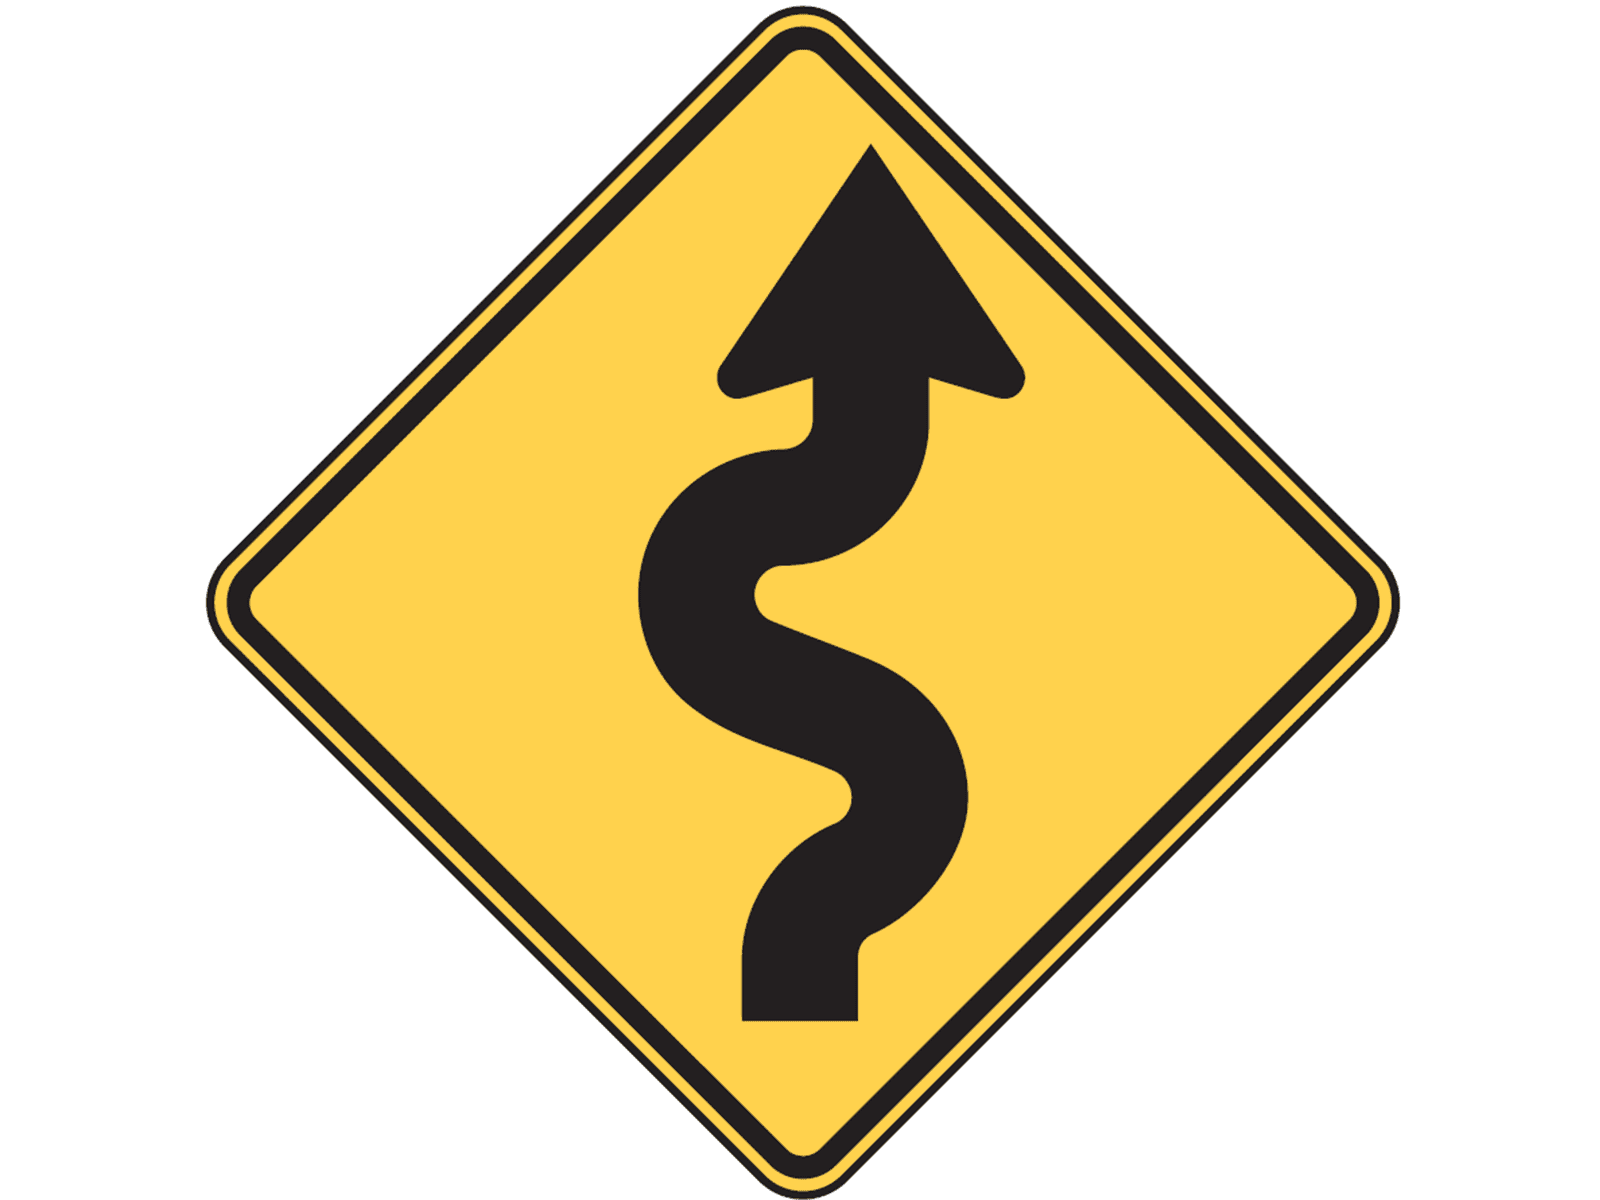 Winding Road Ahead W1-5 - W1: Curves and Turns